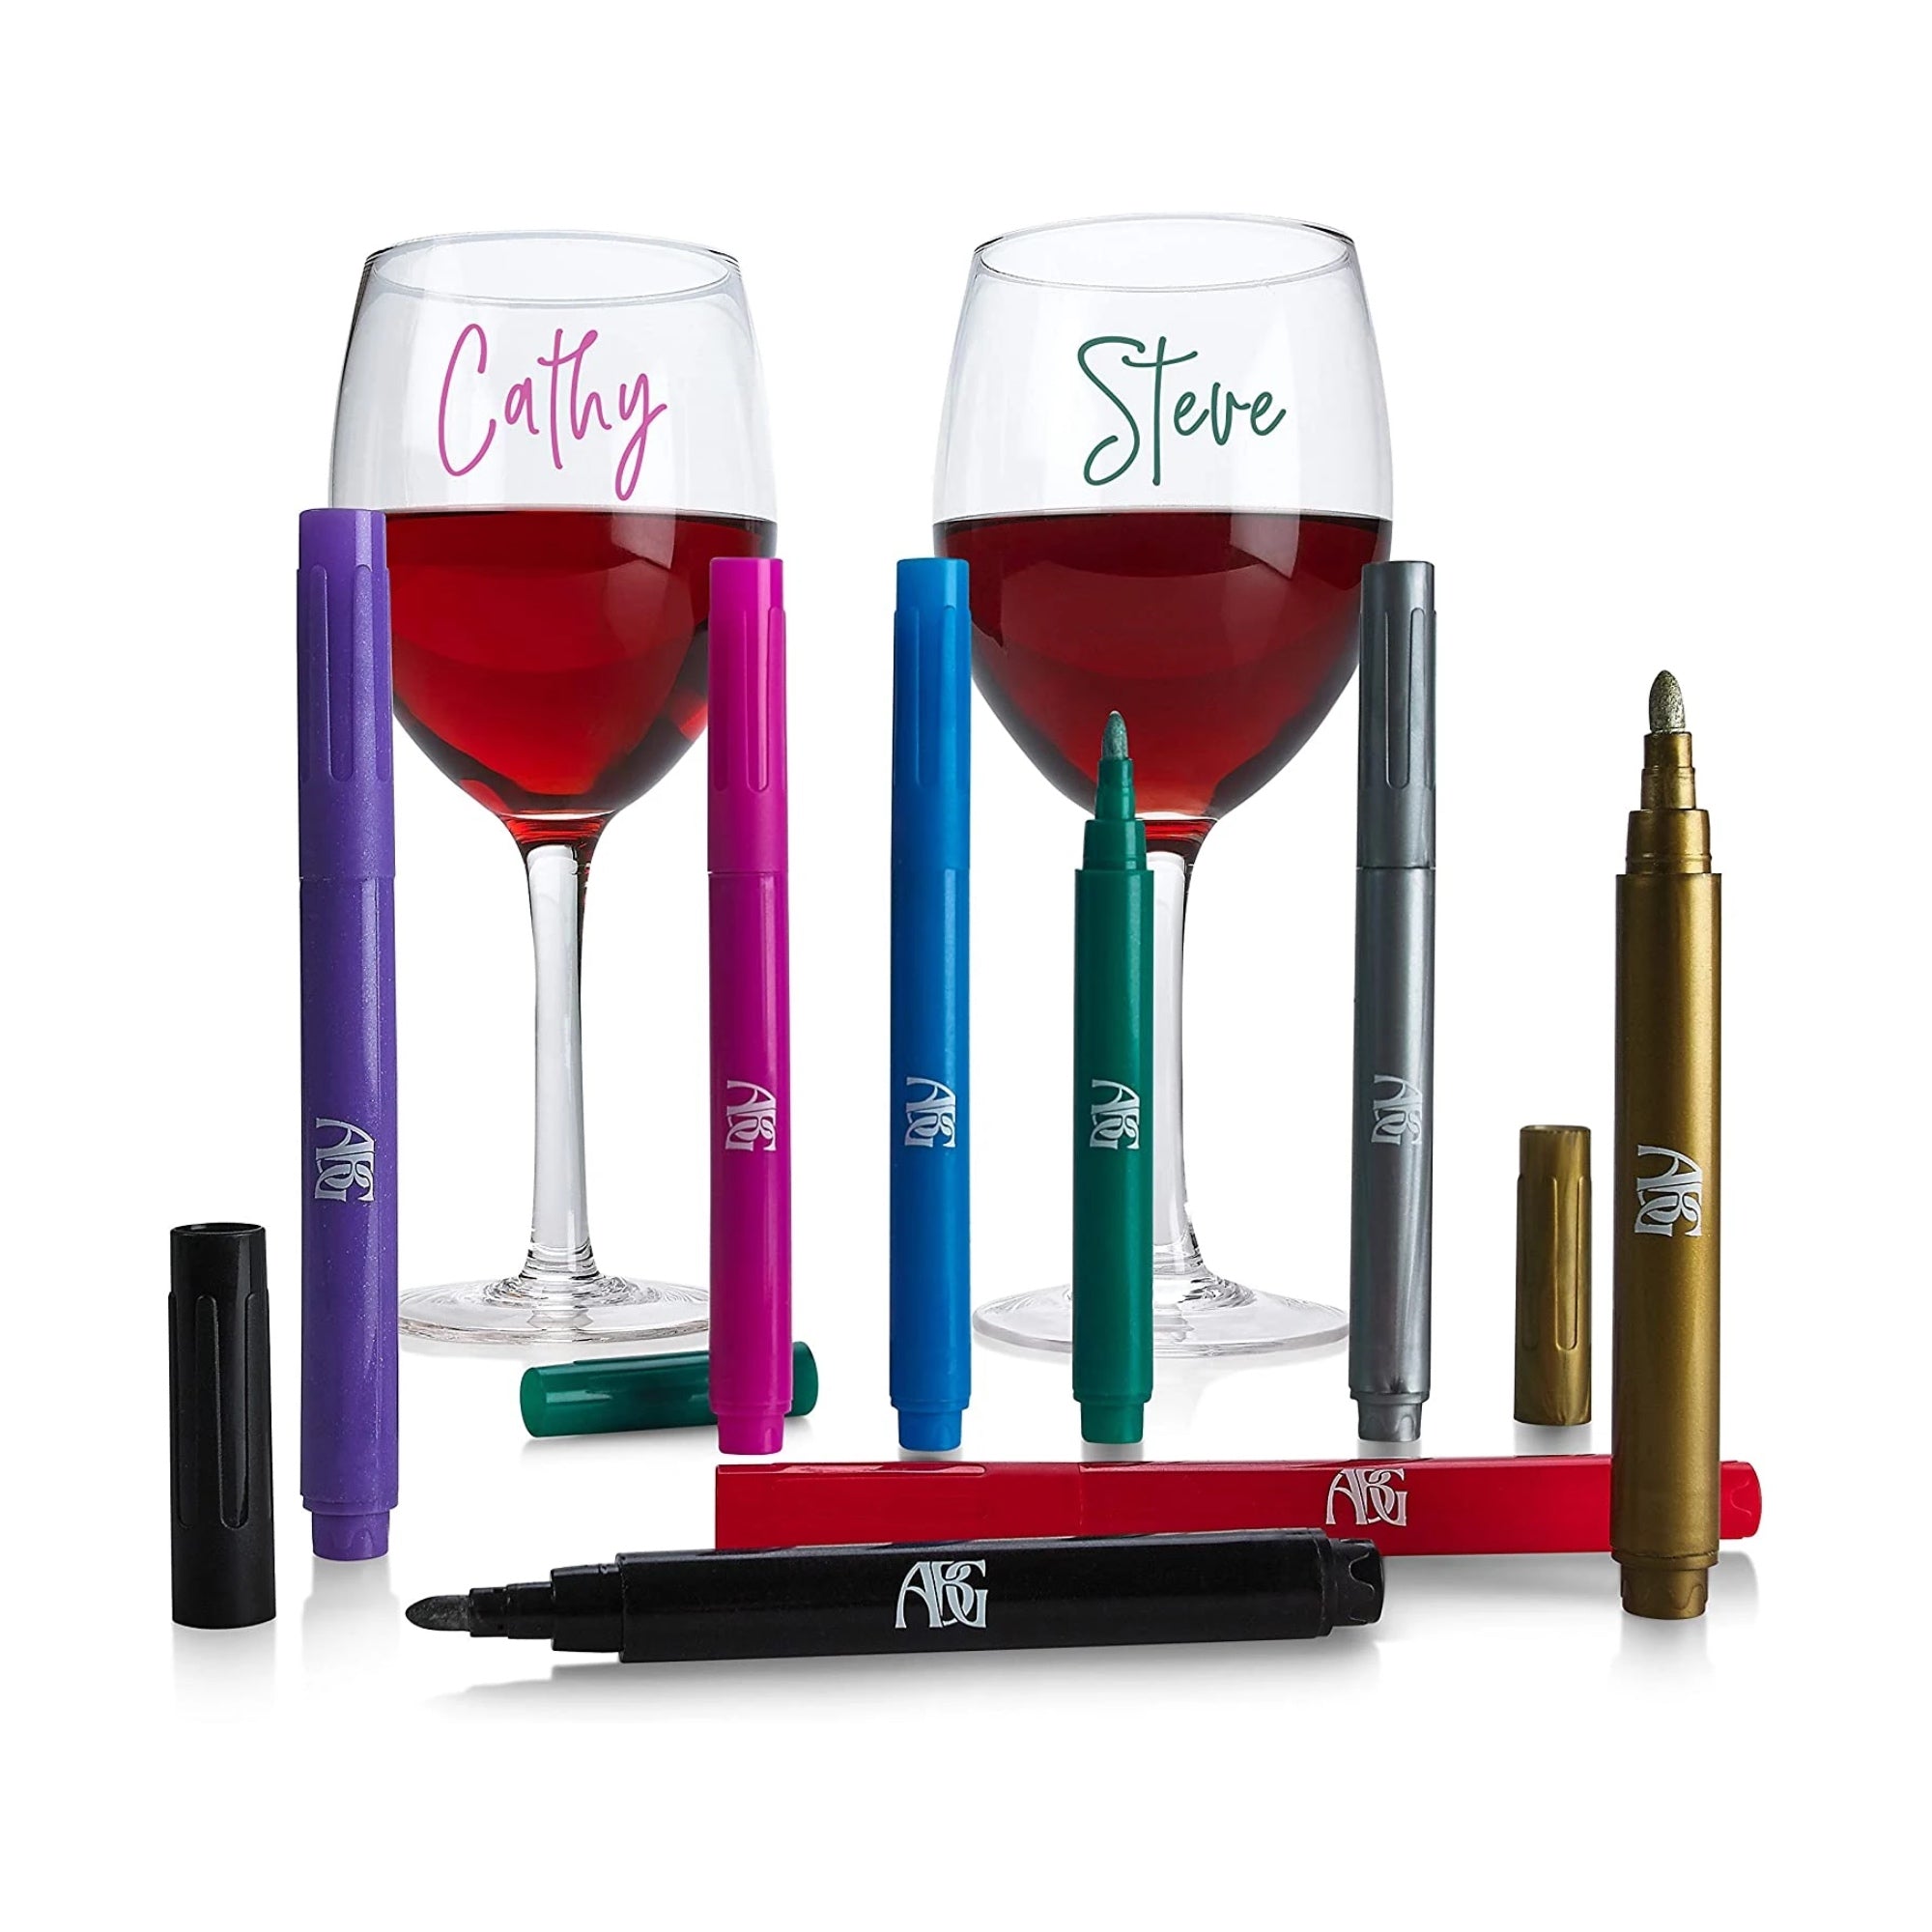 Gainwell Wine Glass Markers - Pack of 8 Food-Safe Non-Toxic Wine Glass Marker Pens - Can Also Be used on Ceramic Plates and Other Glass and Dinnerware